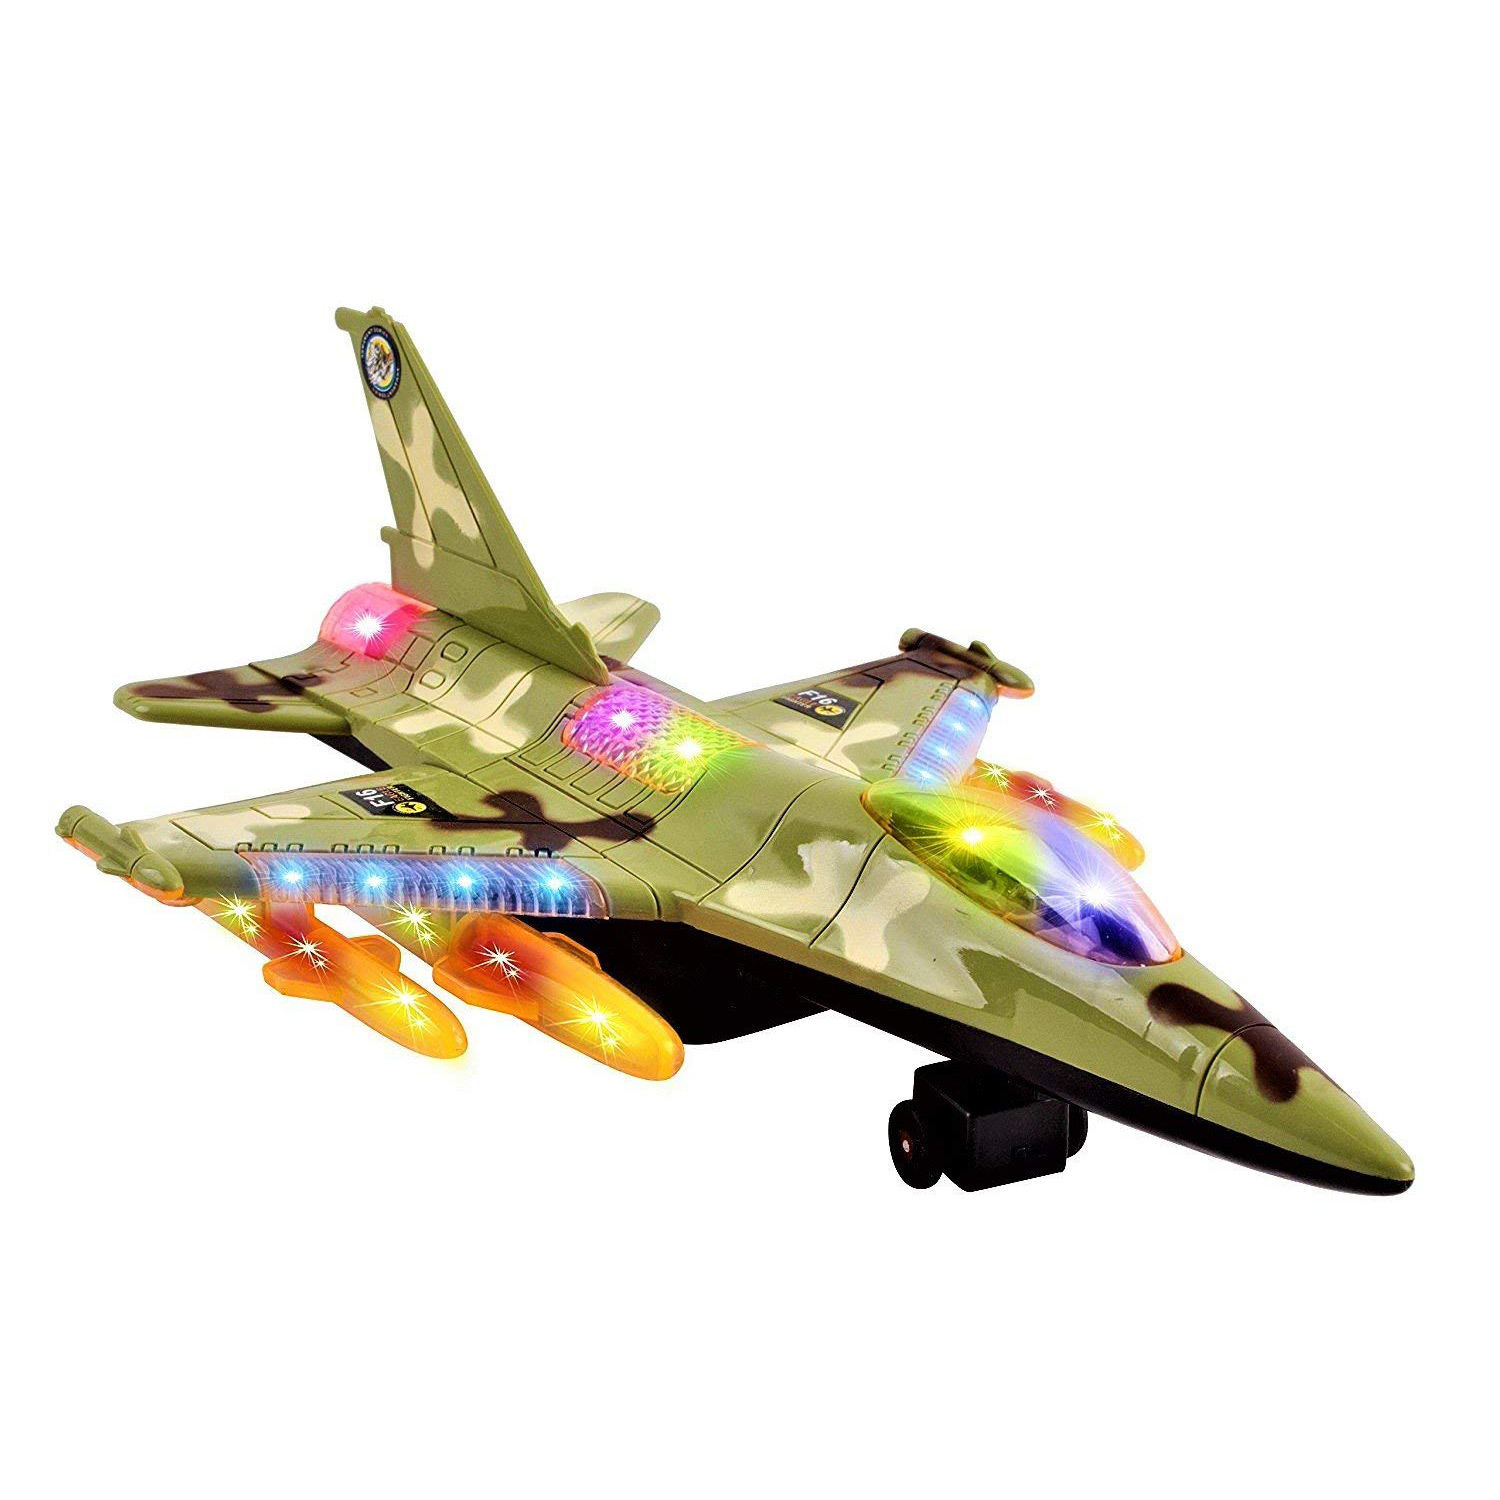 Toy Army Air Force Fighter Jet F16 Battery Operated Kid\'s Bump and Go Toy Plane With Flashing Lights And Sounds Bumps Into Something and Will Change Direction Perfect For Boys And Girls (Green)